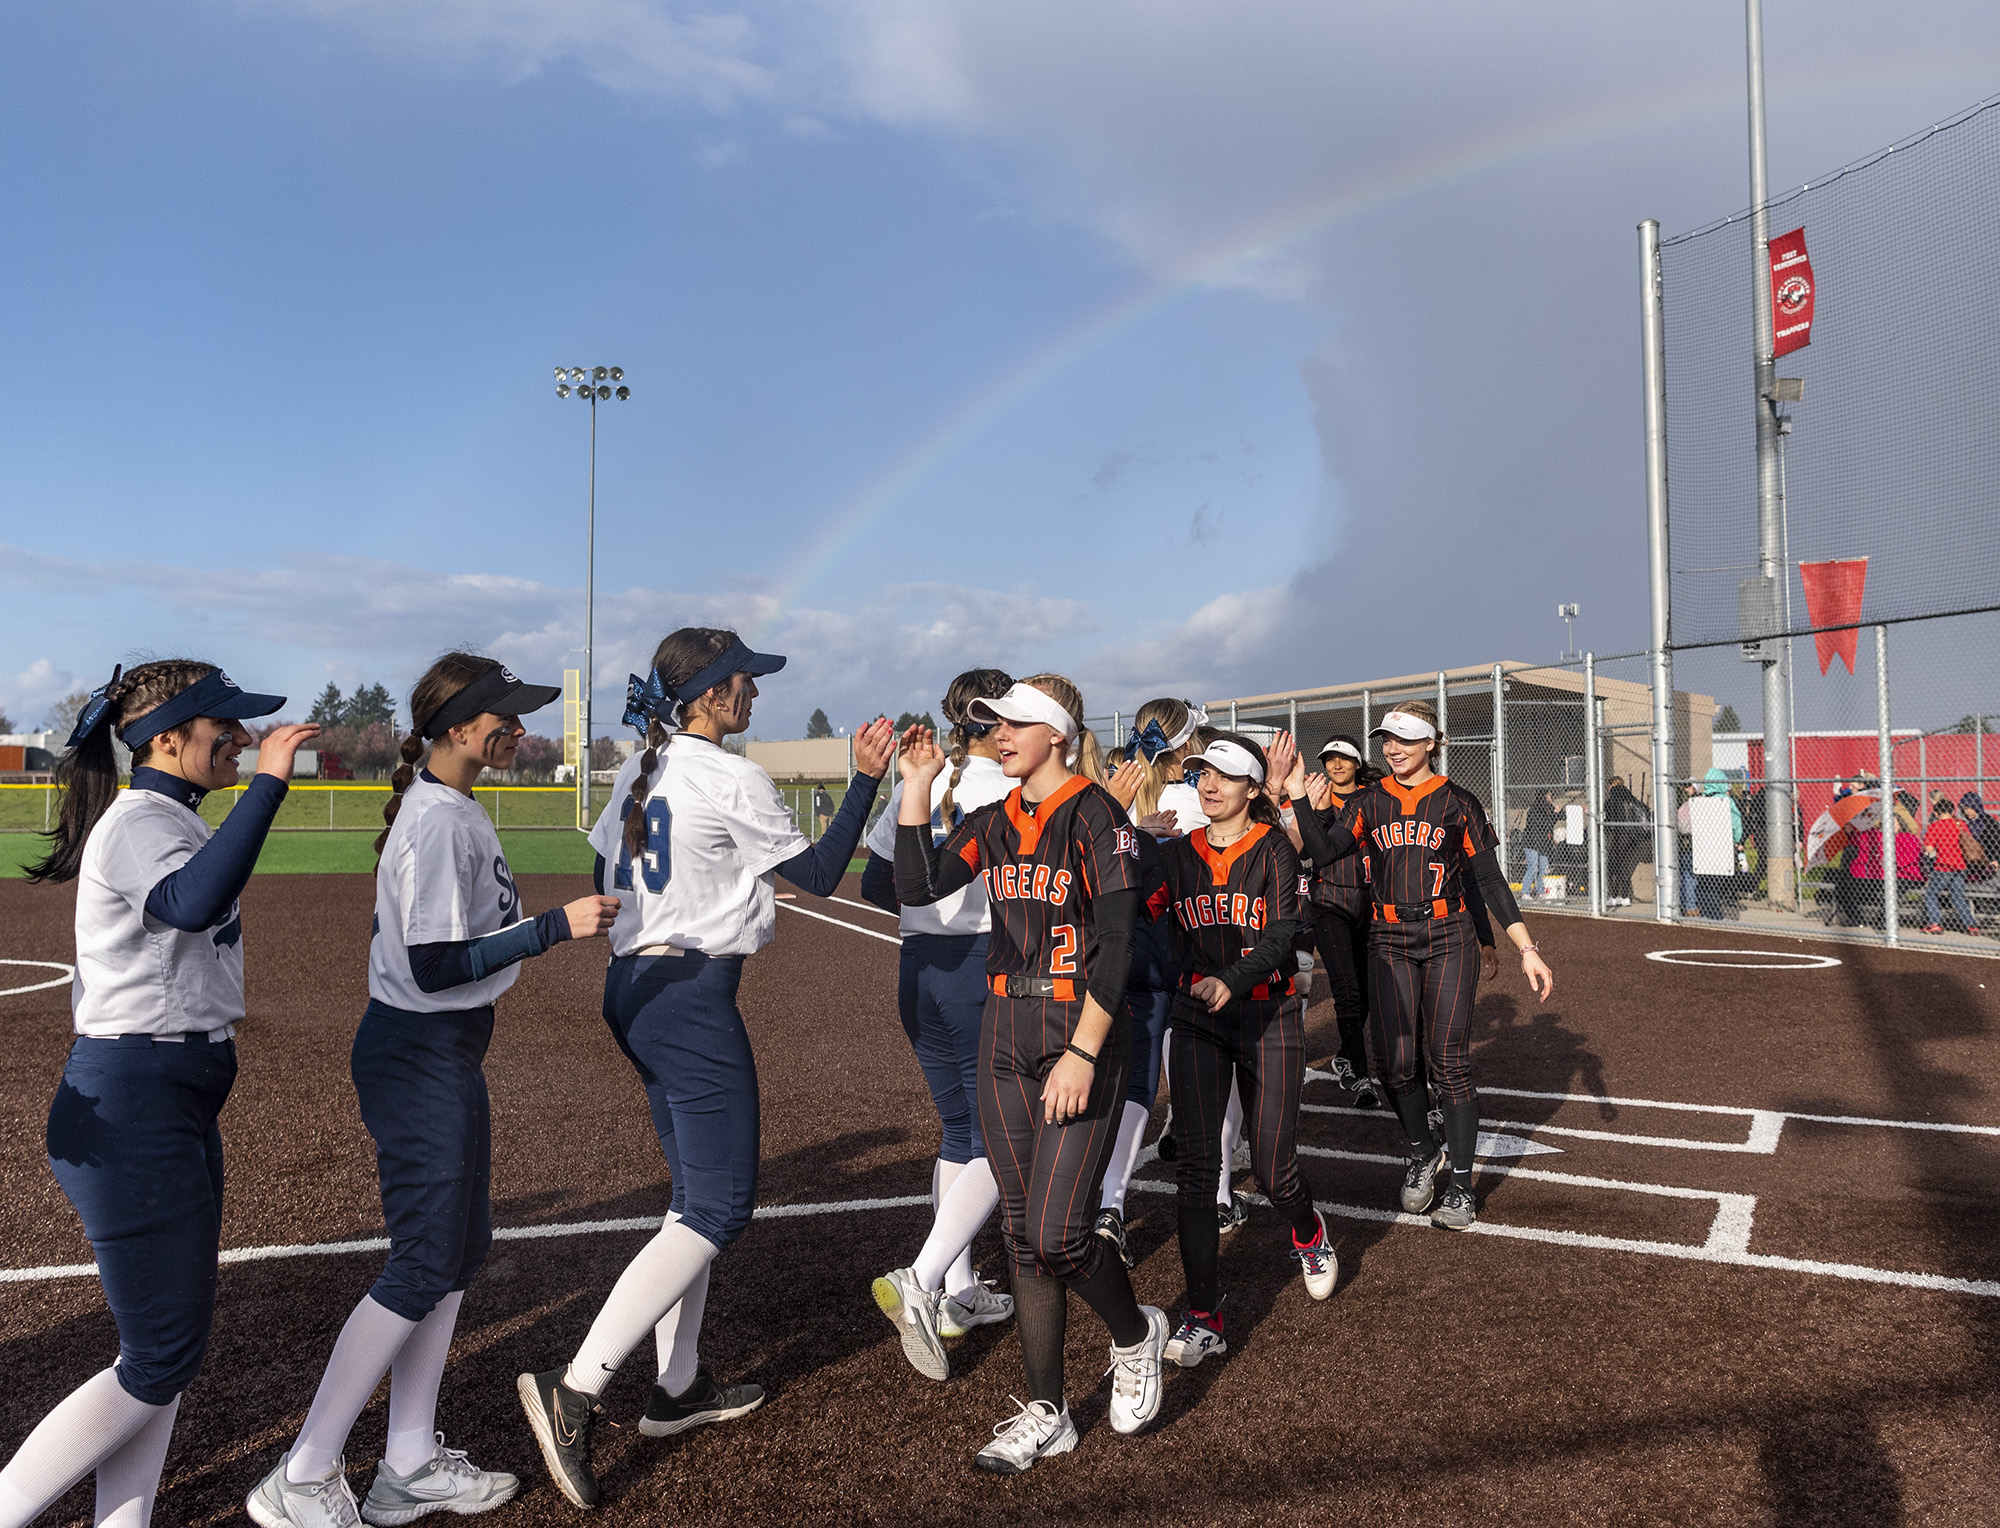 A rainbow hangs above as Skyview and Battle Ground players high five after the game Wednesday, April 12, 2023, after the Storm’s 4-0 win against Battle Ground at Fort Vancouver High School.